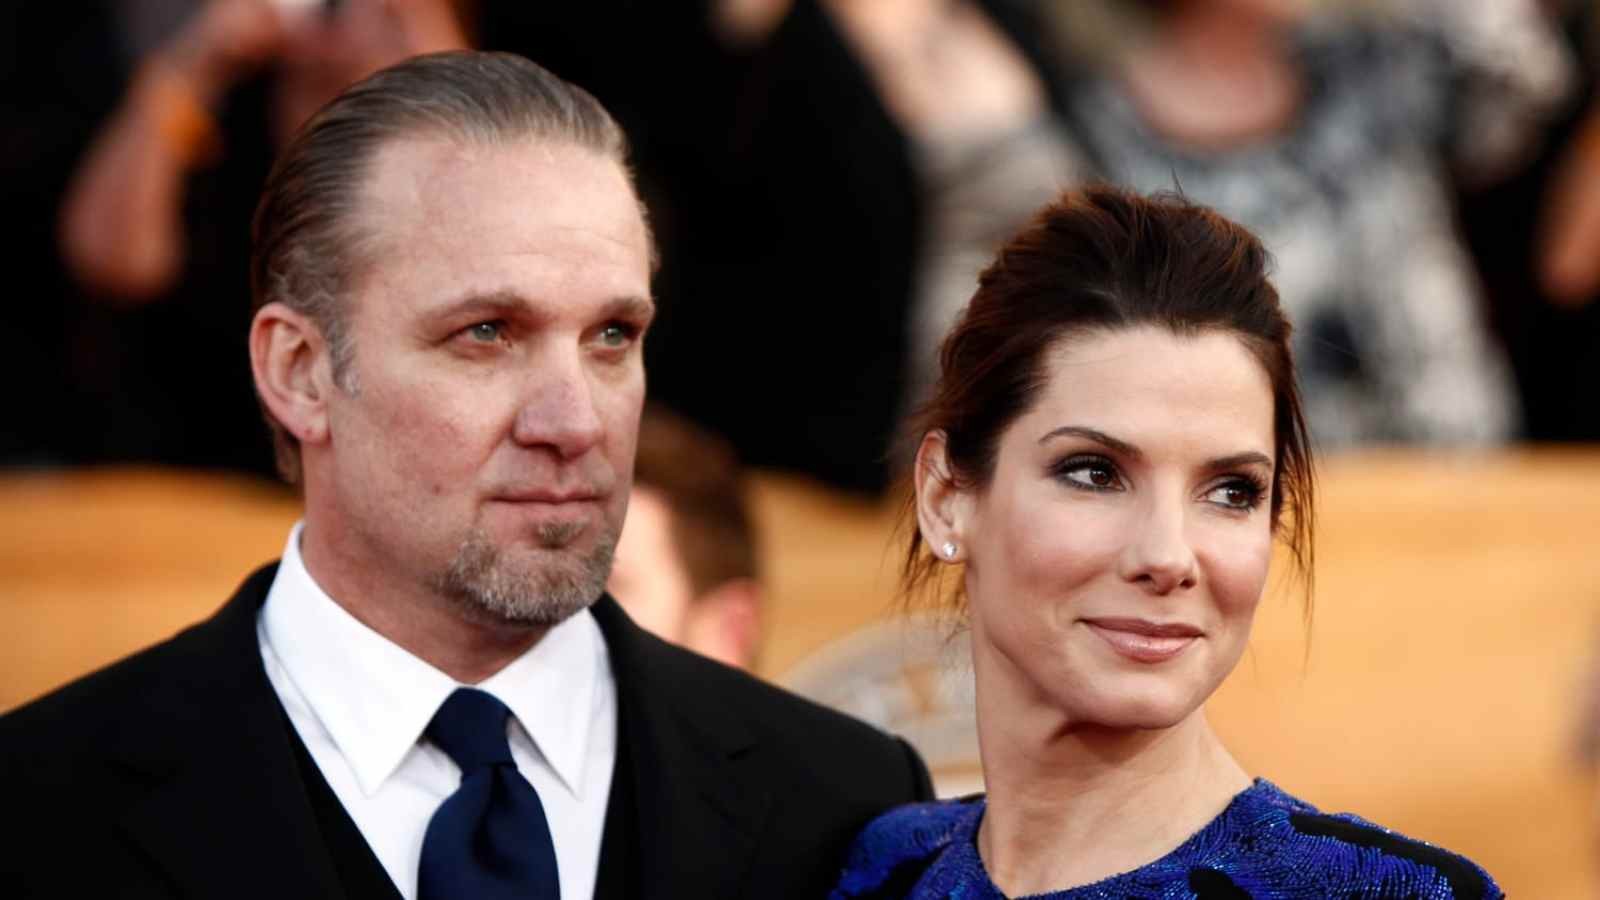 Jesse James and Sandra Bullock at an event